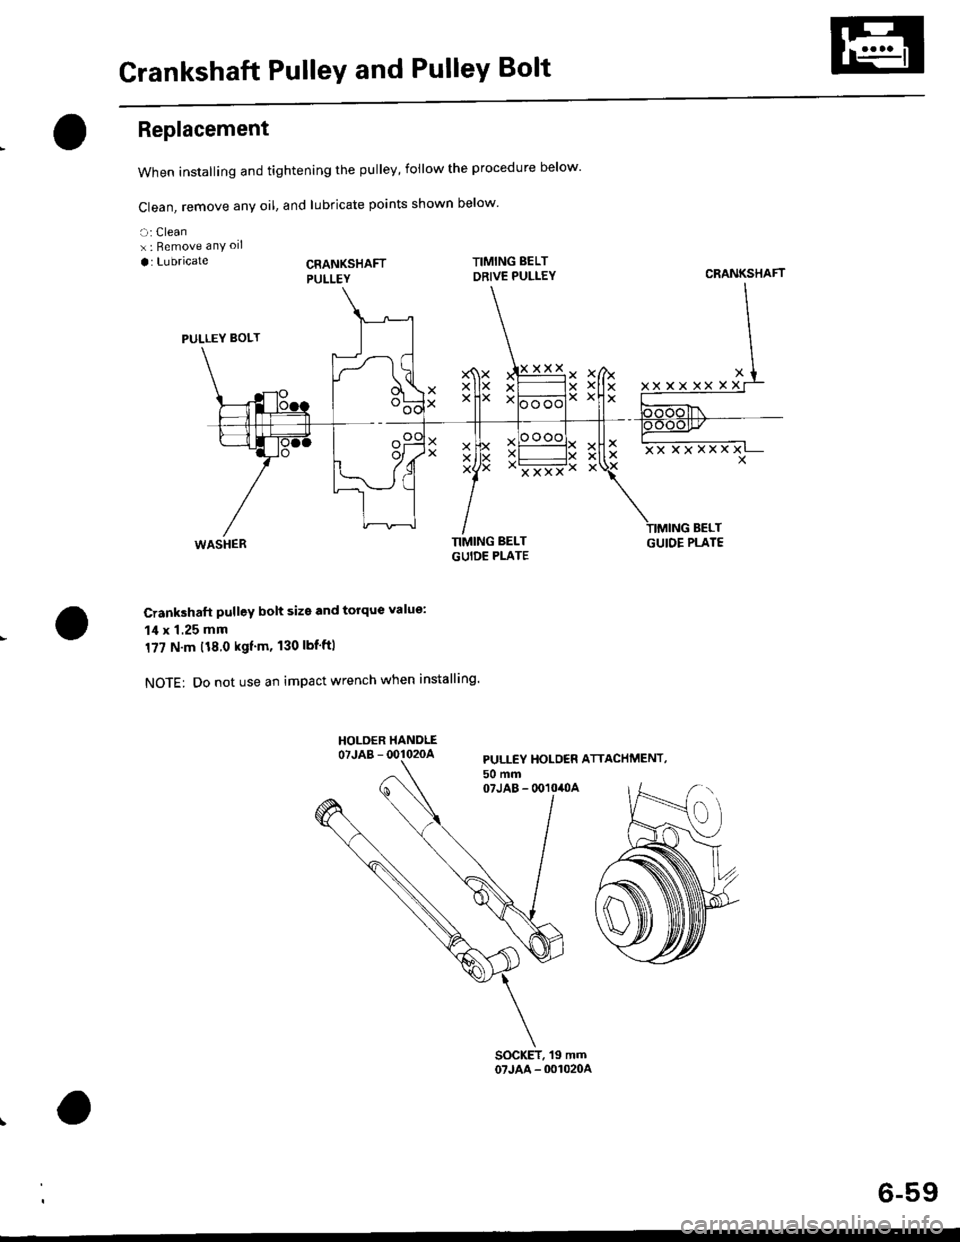 HONDA CIVIC 1998 6.G User Guide Crankshaft PulleY and PulleY Bolt
Replacement
When installing and tightening the pulley, follow the procedure below
Clean, remove any oil, and lubricate points shown below
a: Cleanx : Bemove anY oll
